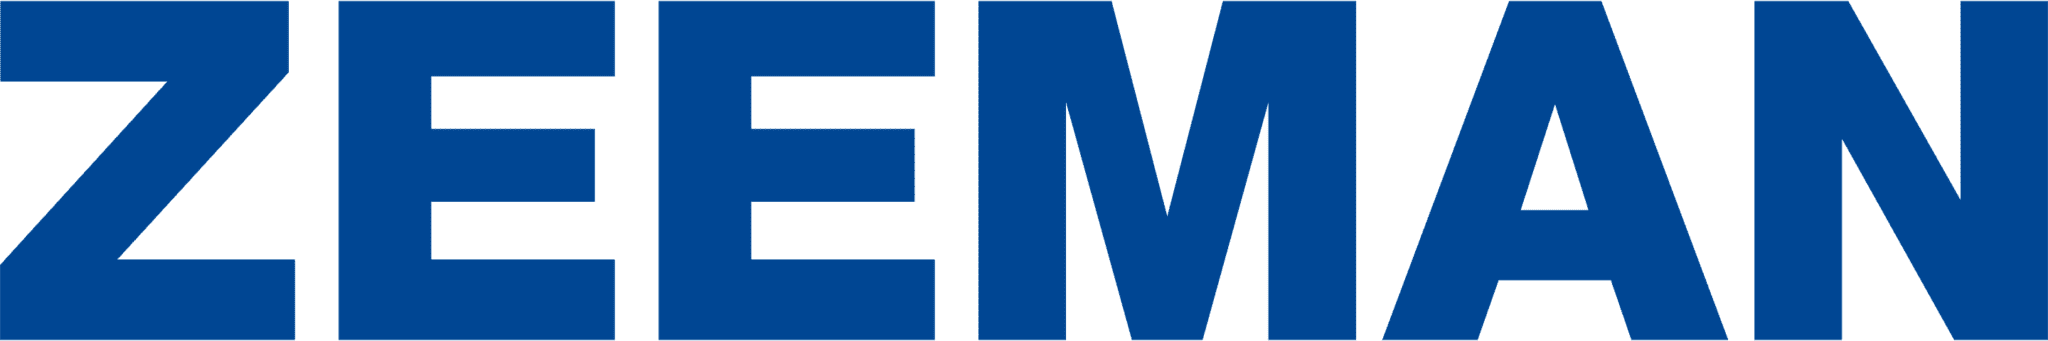 This is an image of the Zeeman logo.